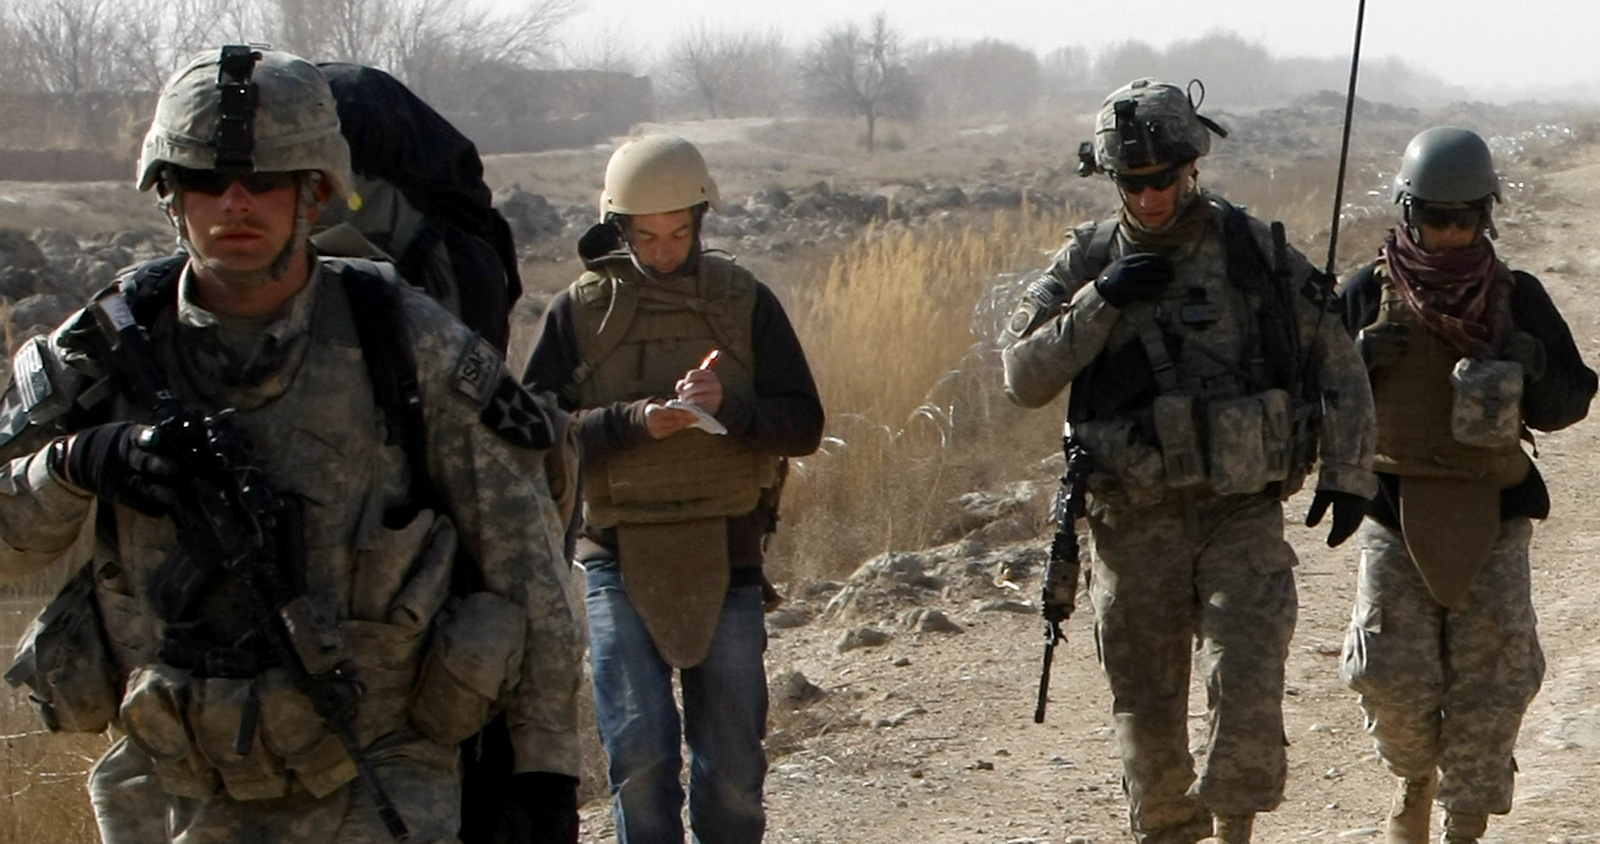 Associated Press reporter Chris Torchia takes notes as he walks with U.S. soldiers during a patrol in the Badula Qulp area in Helmand province, Afghanistan, Feb. 15, 2010. (AP/Pier Paolo Cito)